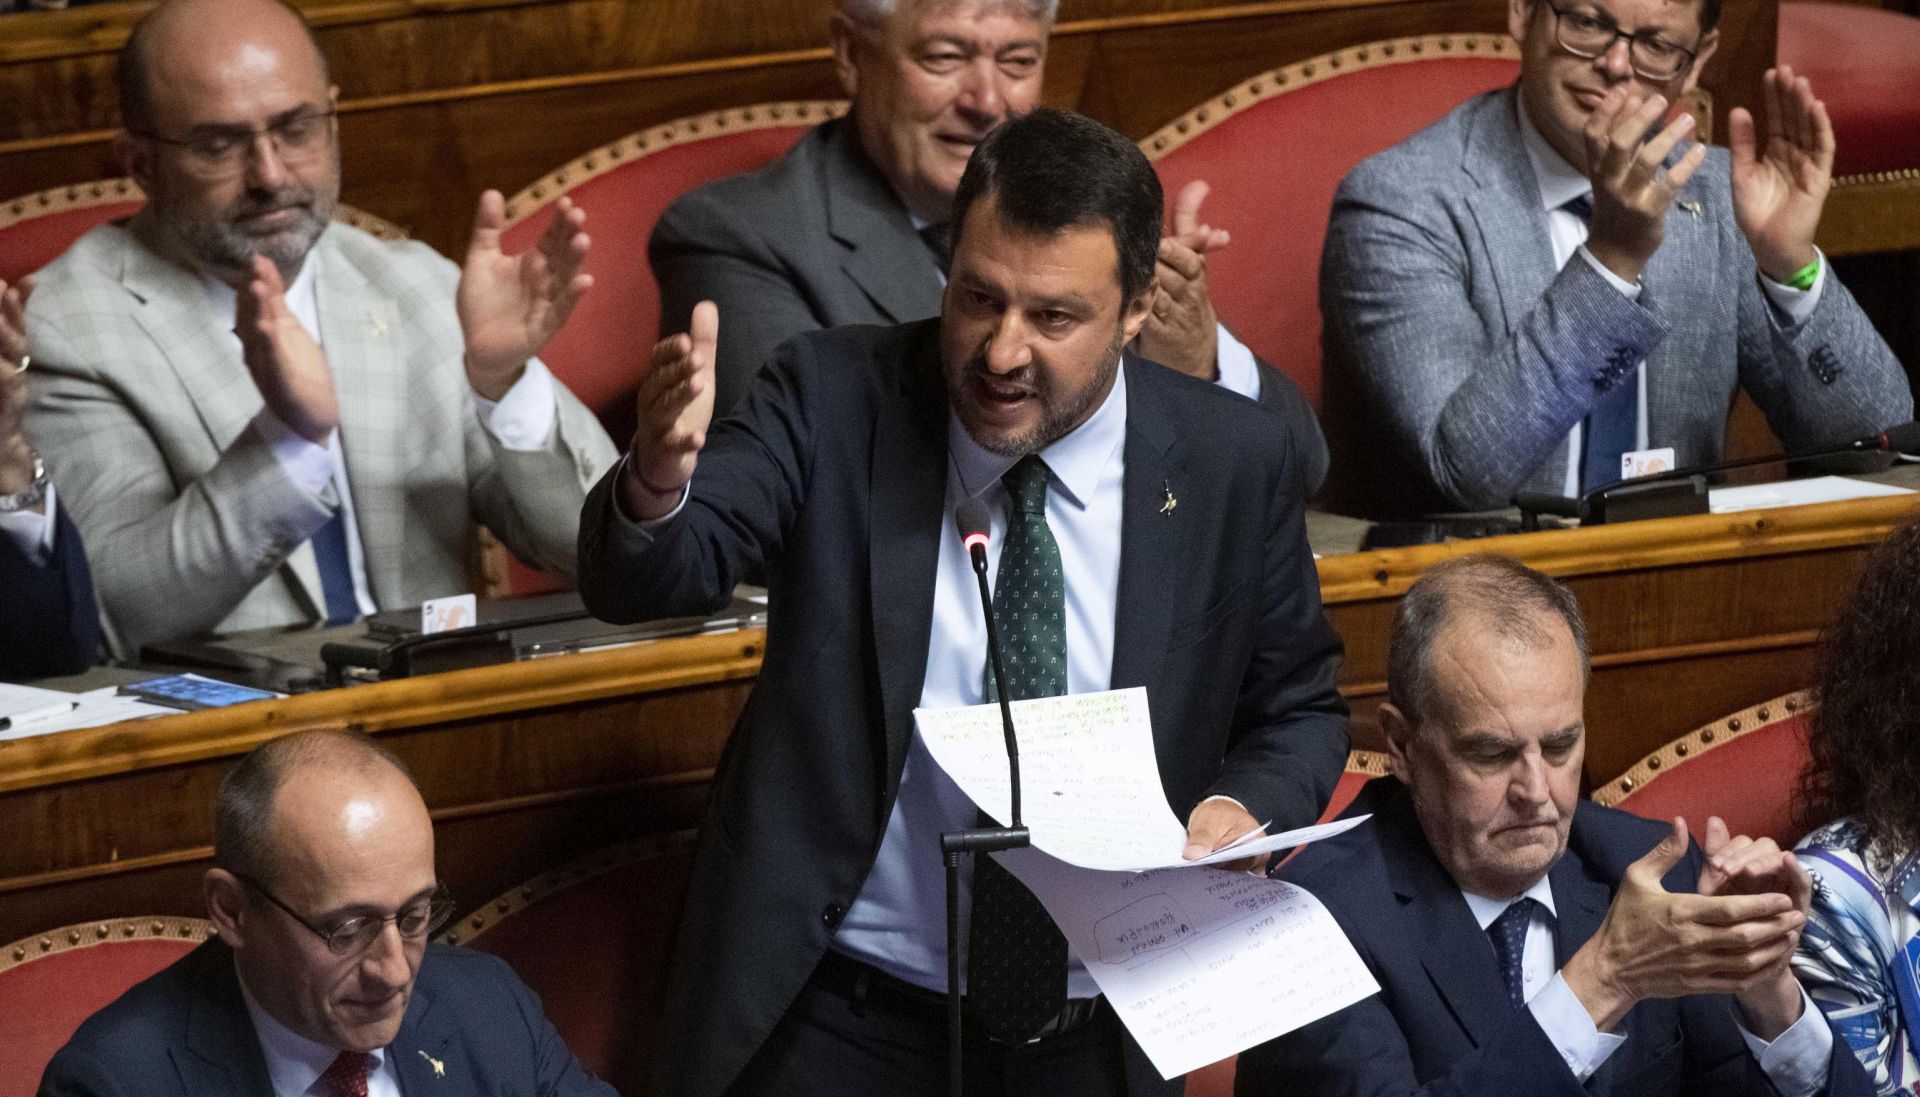 epa07782528 Italian Deputy Premier and Interior Minister Matteo Salvini addresses to the Senate, Rome, Italy, 20 August 2019. Italian Premier Giuseppe Conte said that the government has come to an end and that he would resign.  EPA/CLAUDIO PERI